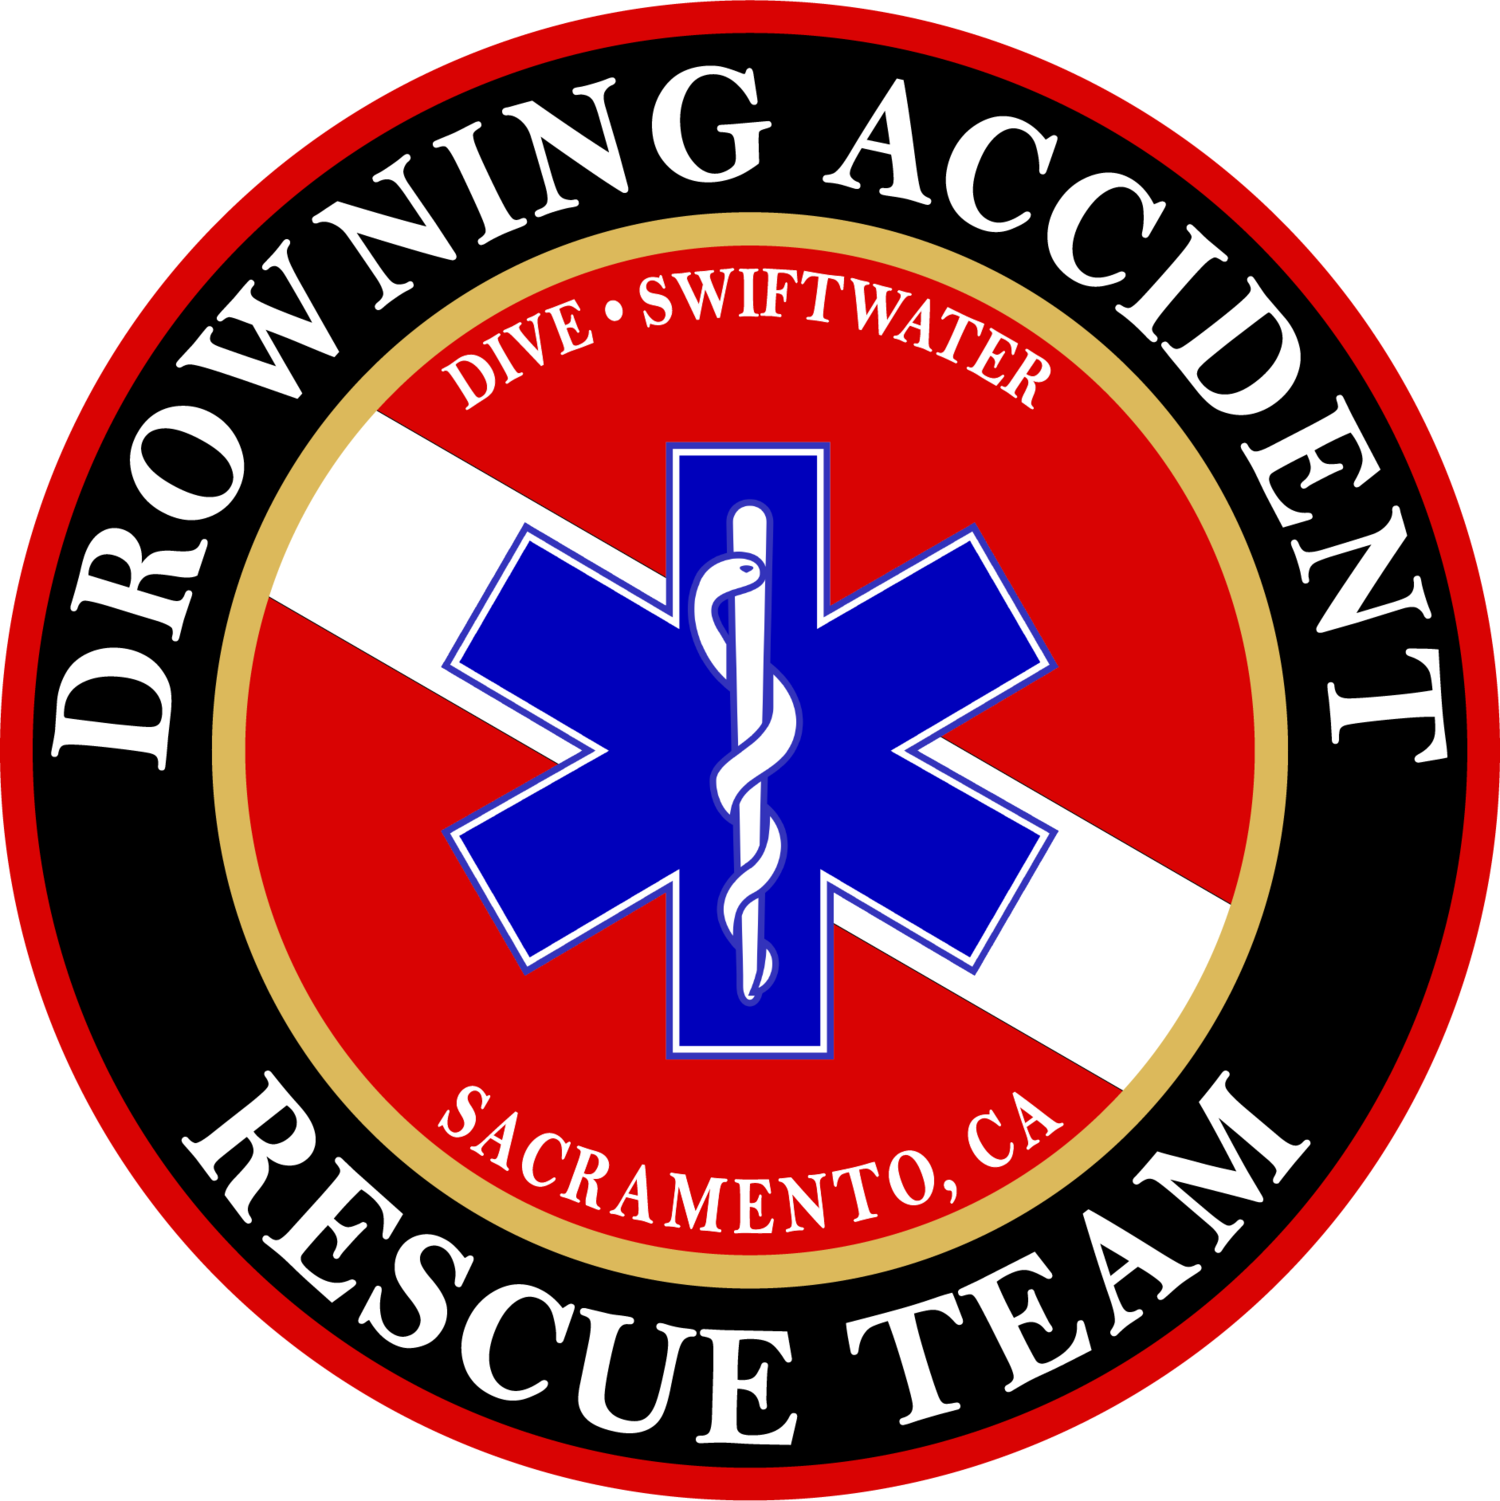 Drowning Accident Rescue Team